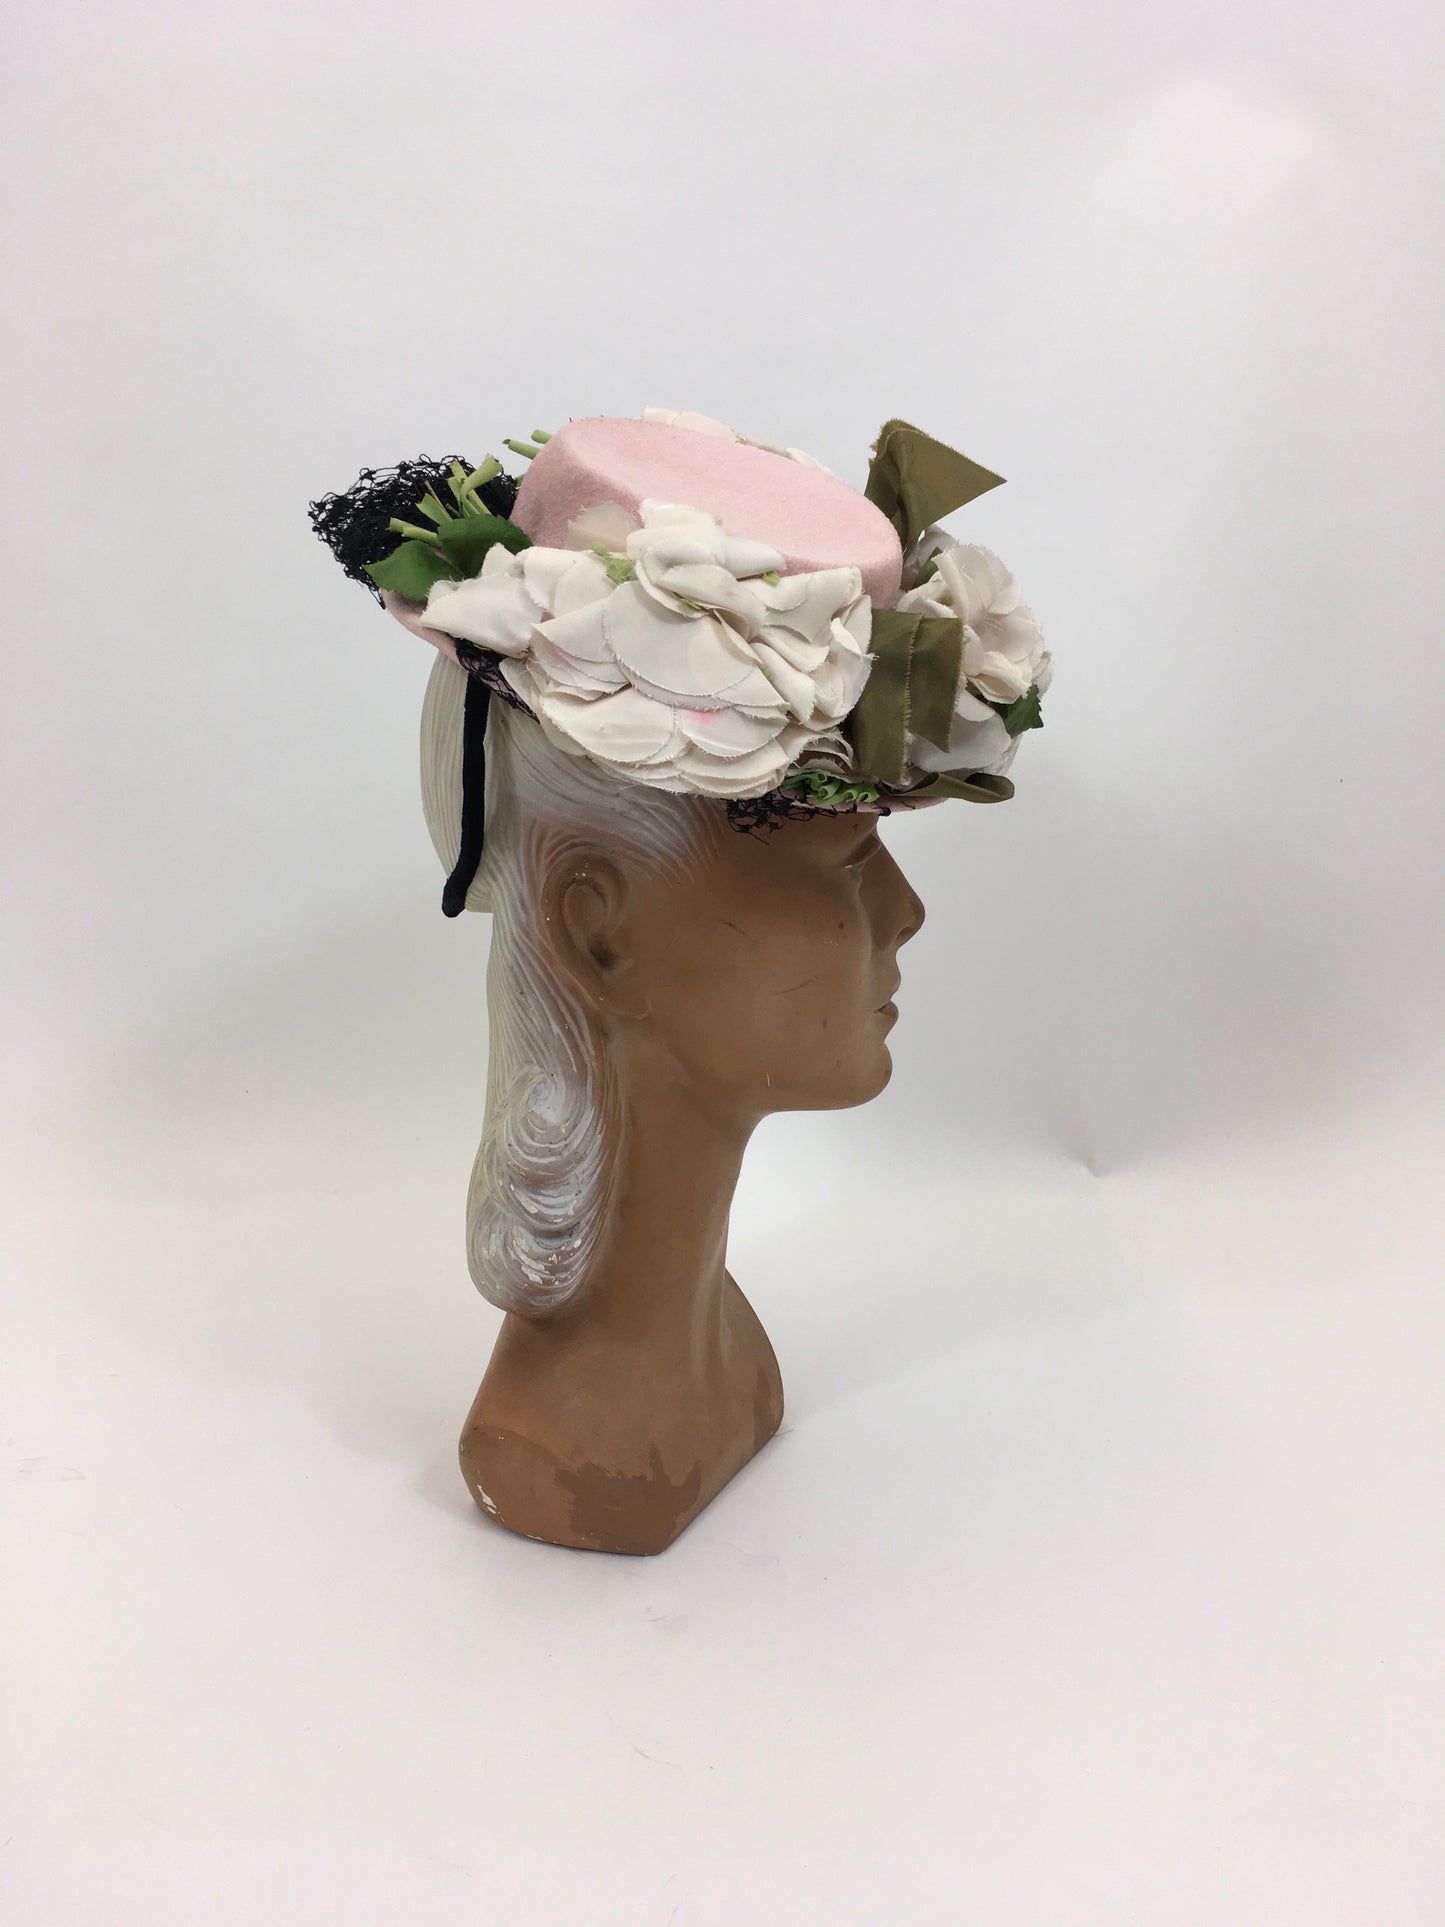 Original 1940's Fabulous Topper Hat - Pale Pink with Flowers and Veil